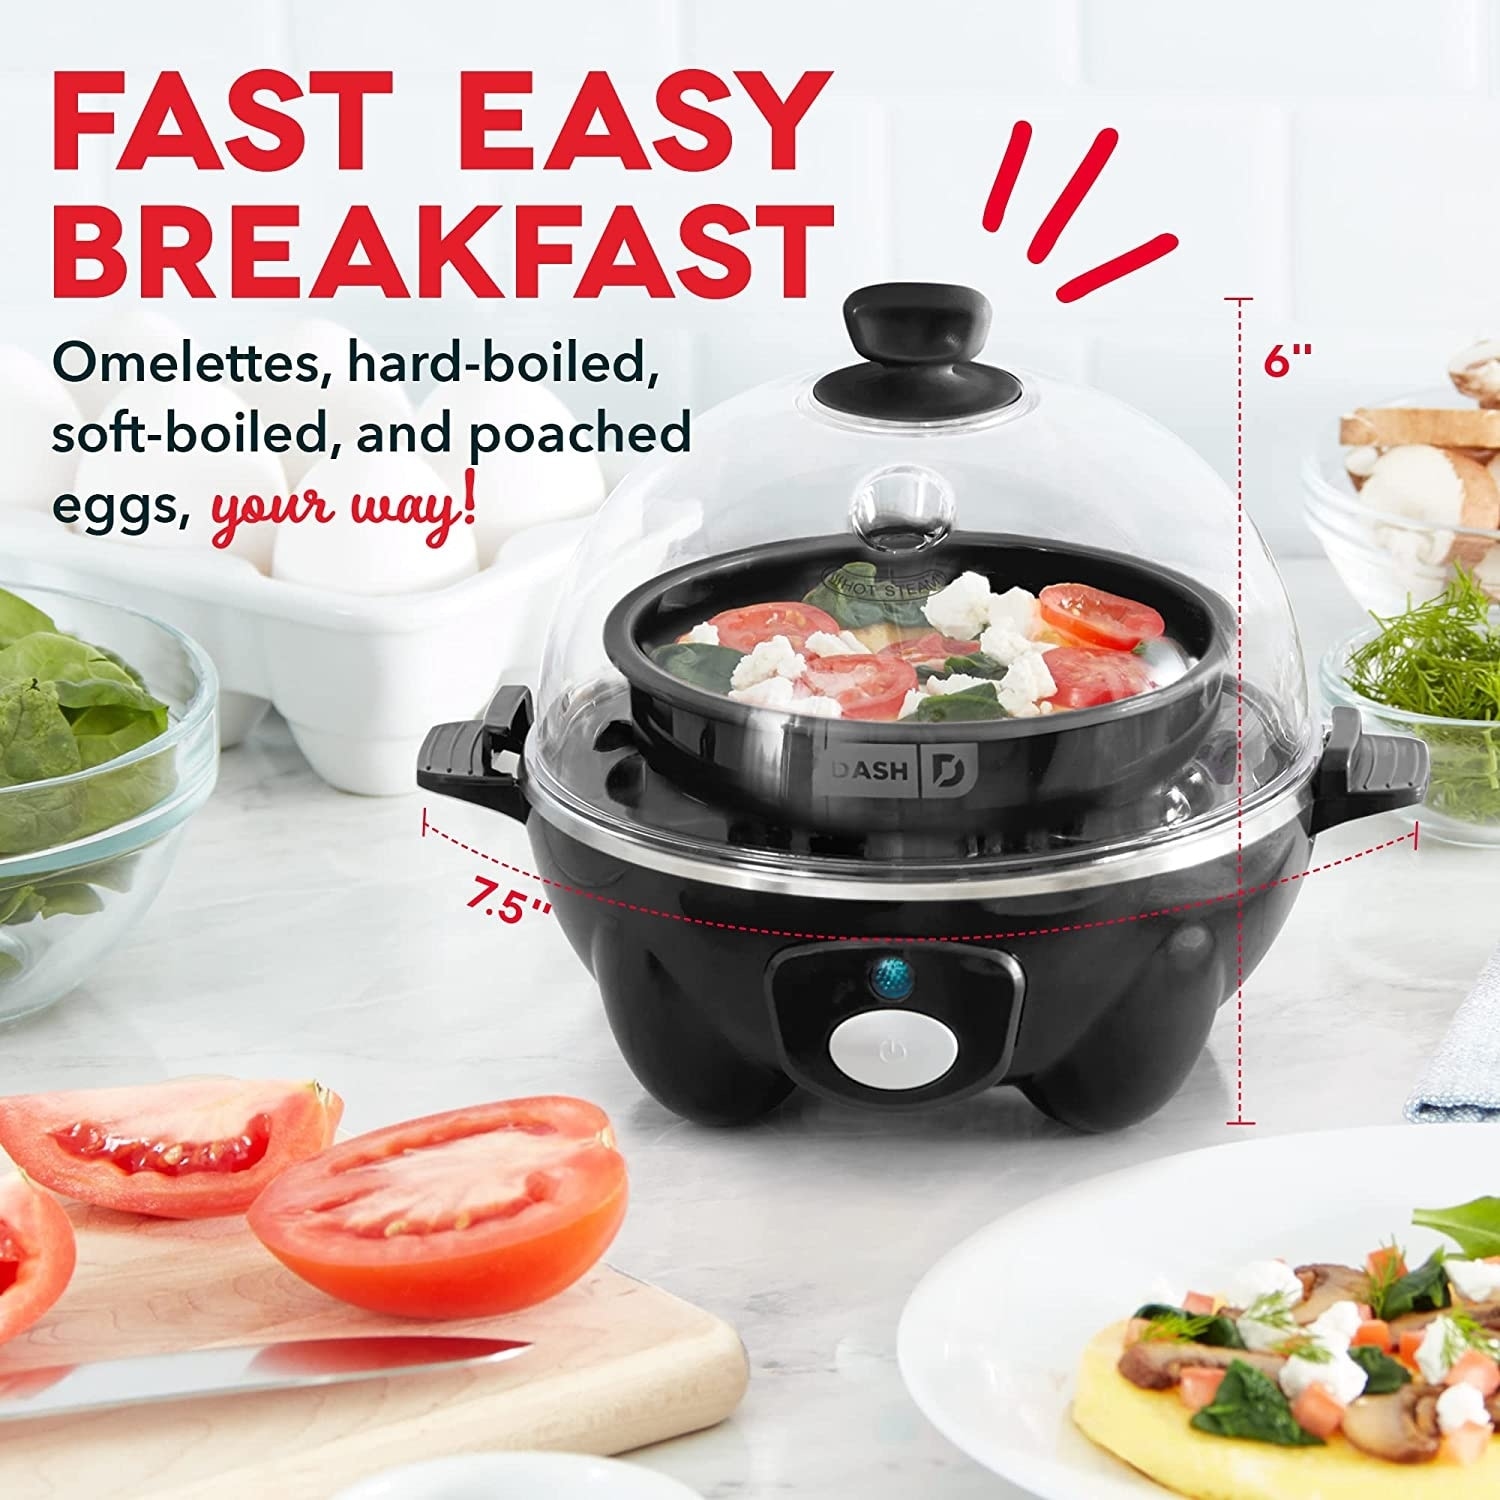 https://ak1.ostkcdn.com/images/products/is/images/direct/d6209a36cde13f0544288fe09ad1c8c673b365e9/Rapid-Egg-Cooker%3A-6-Egg-Capacity-Electric-Egg-Cooker-with-Auto-Shut-Off-Feature---Black.jpg